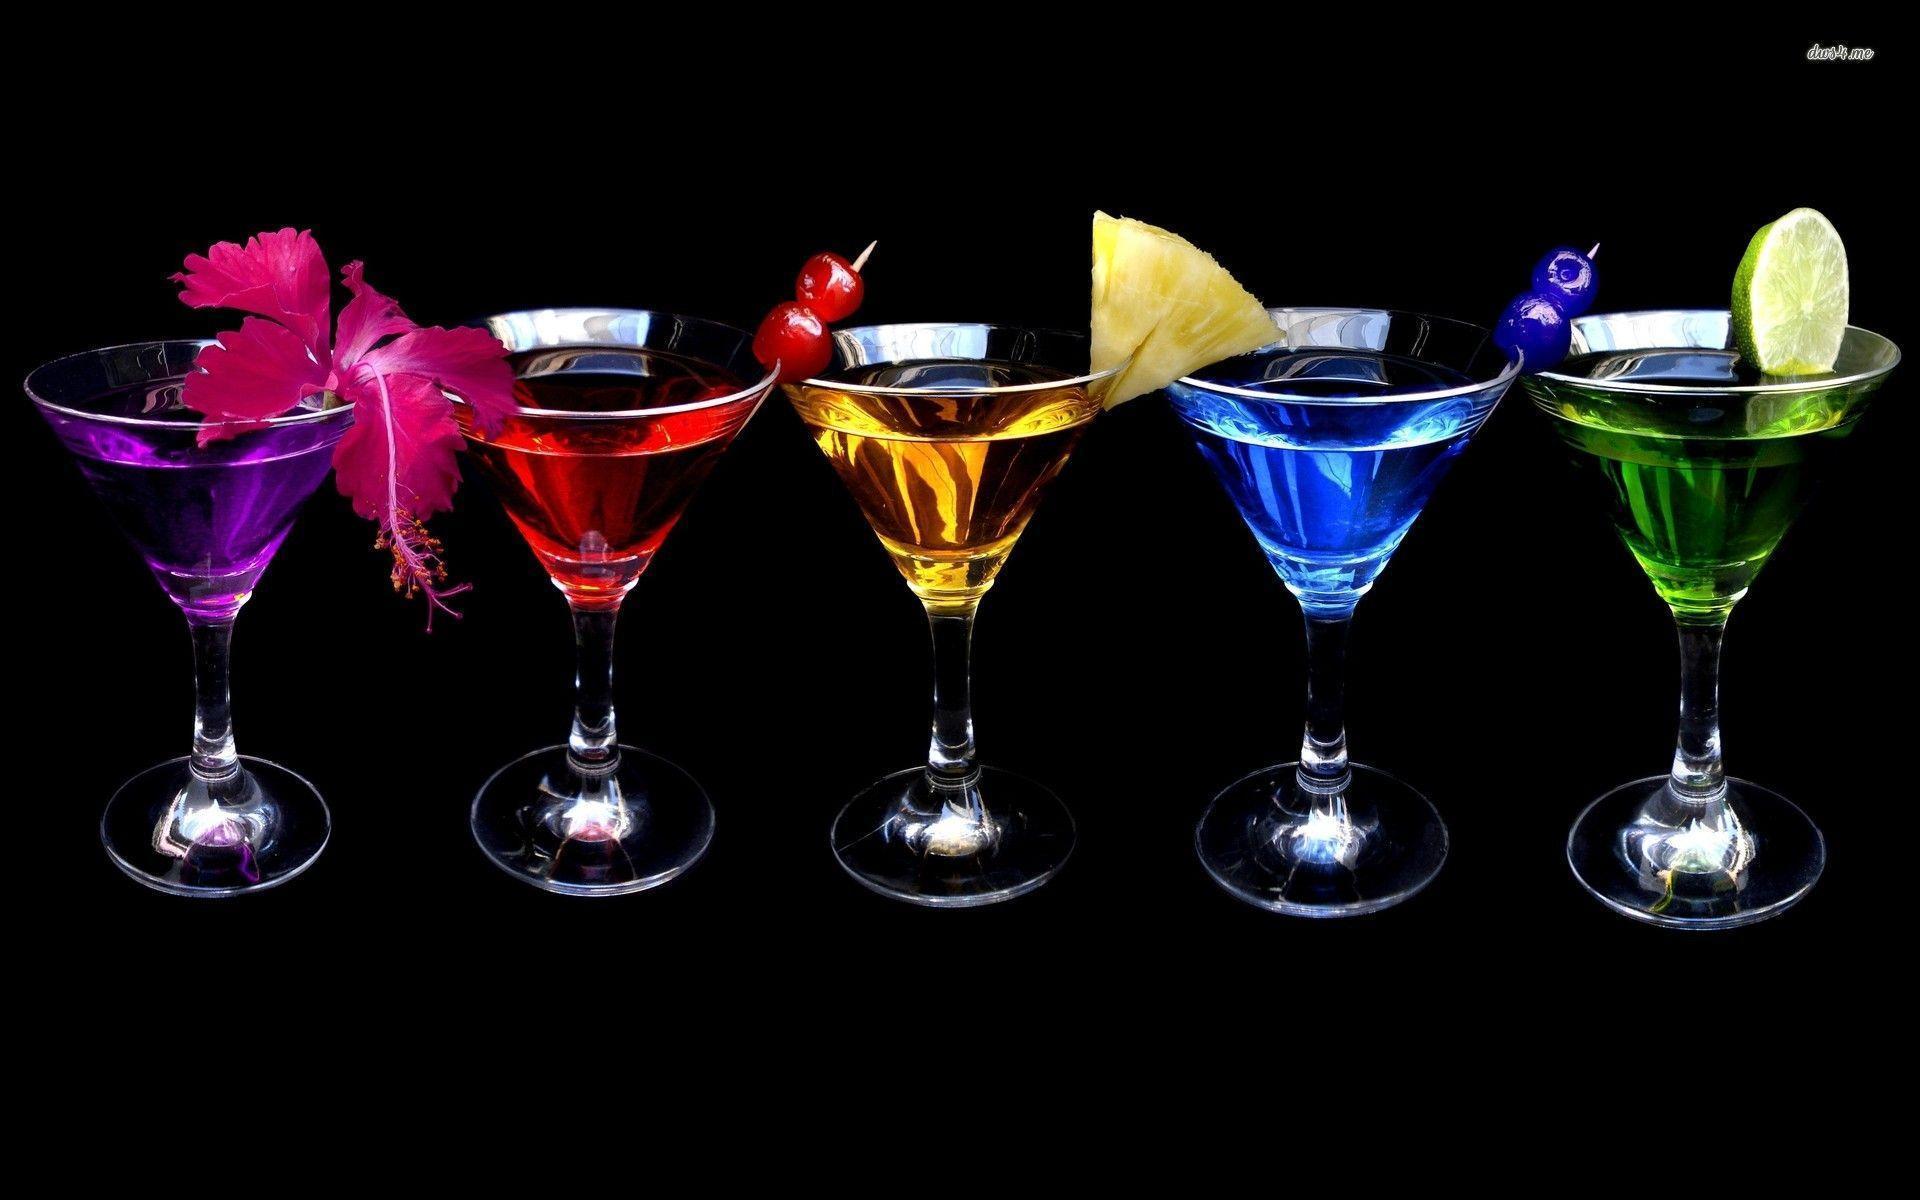 Cocktail Mobile Phone Wallpaper Images Free Download on Lovepik  400425967